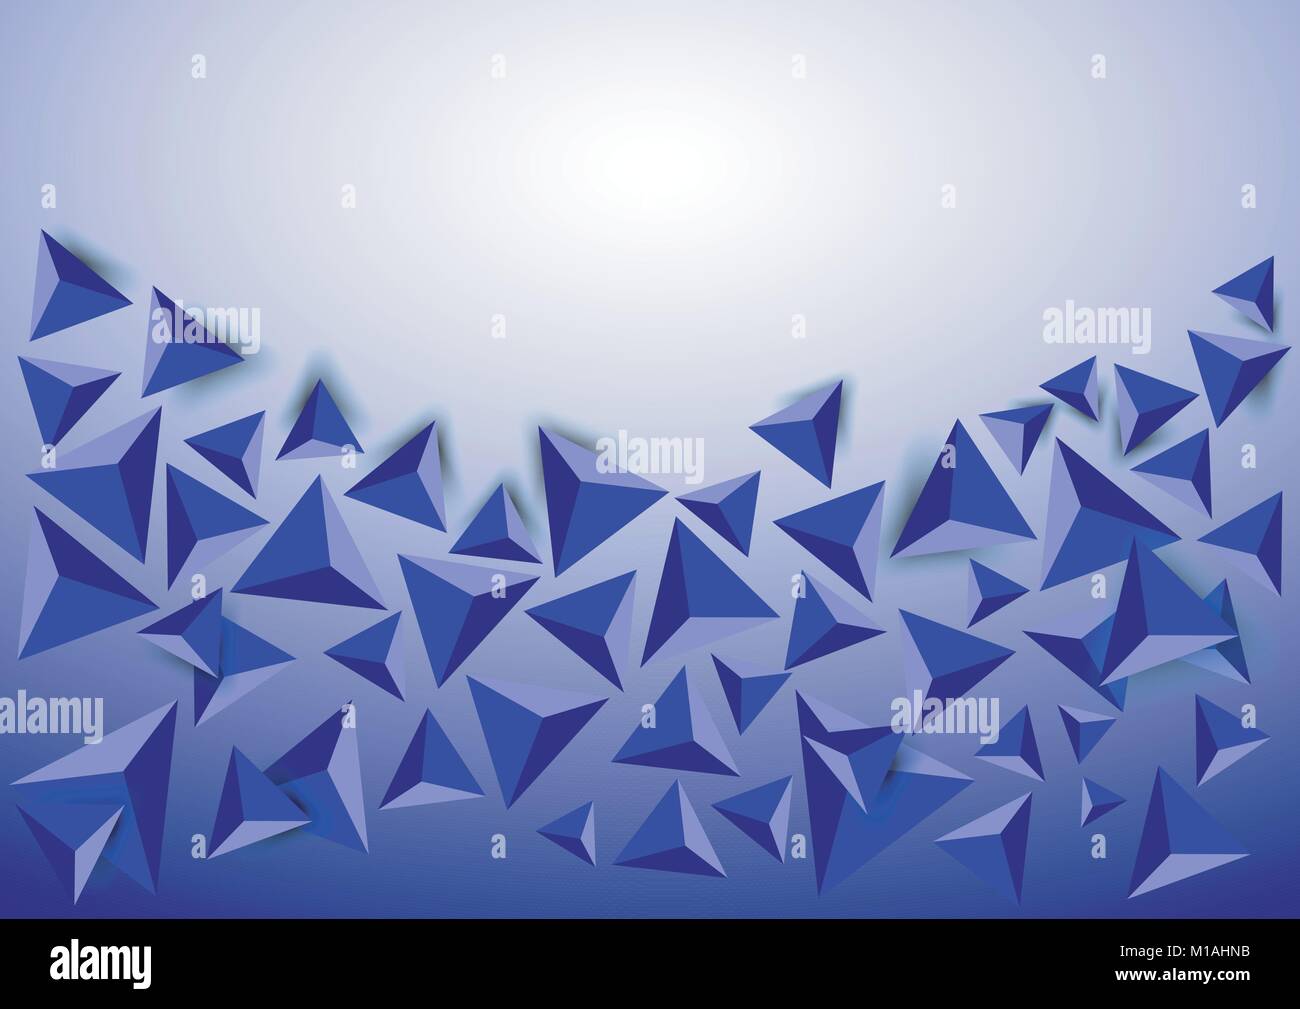 design vector of multiple triangle shapes with color and texture effect for background Stock Vector